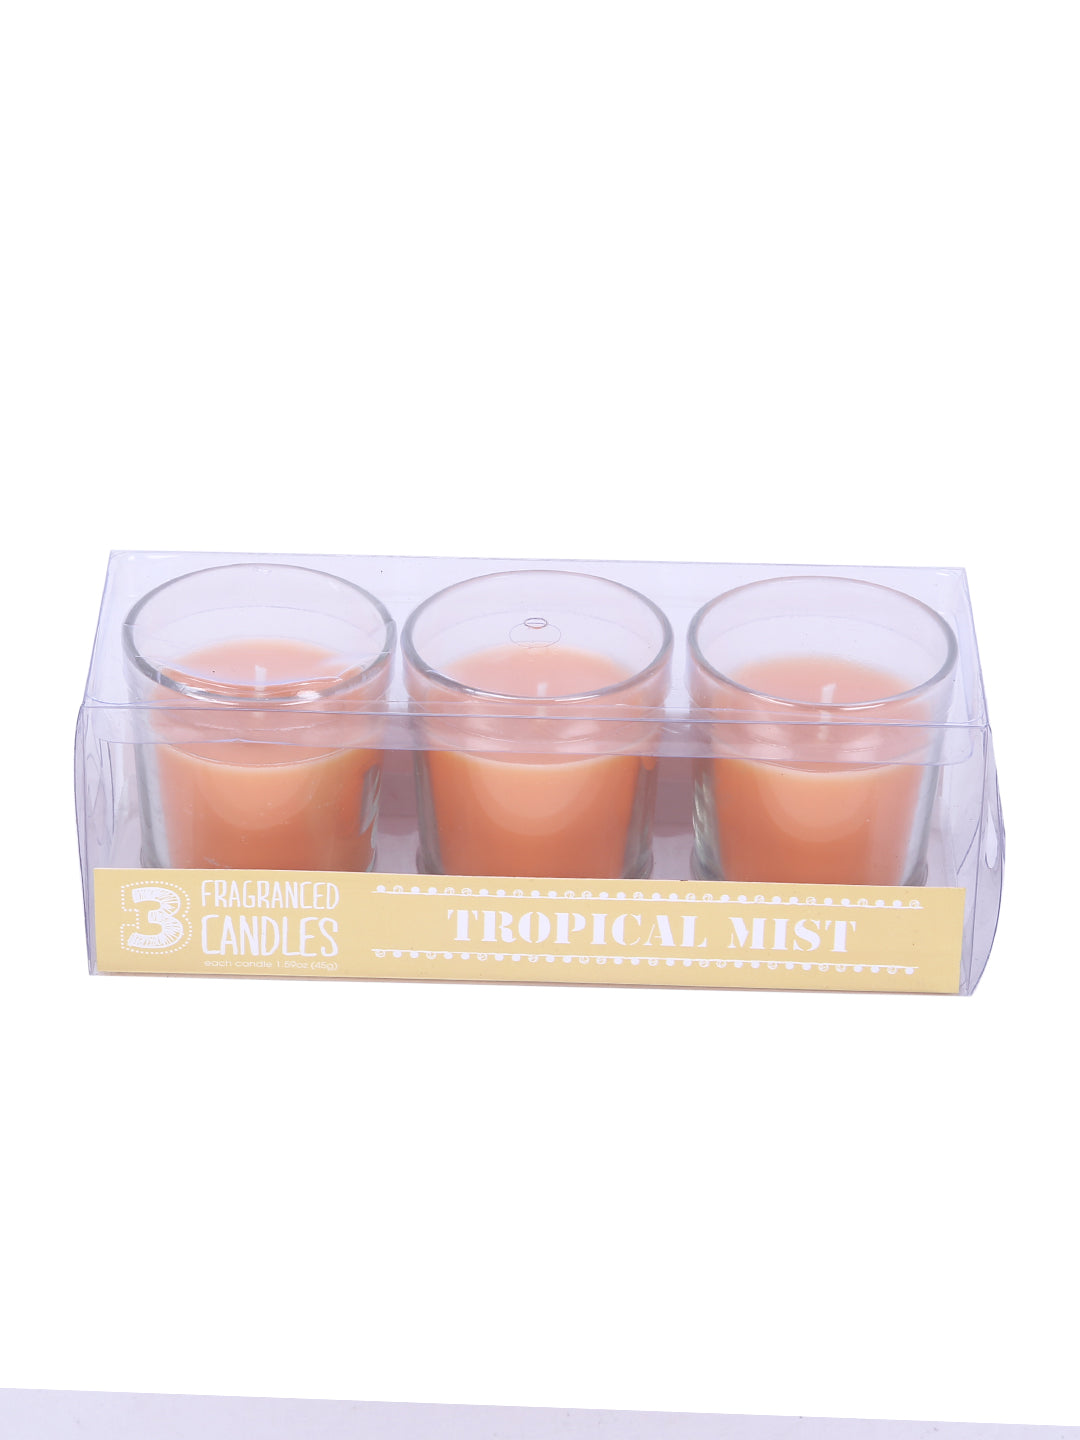 Set of 3 Hosley® Highly Fragranced Tropical Mist Filled Glass Candles. 1.6 Oz wax each